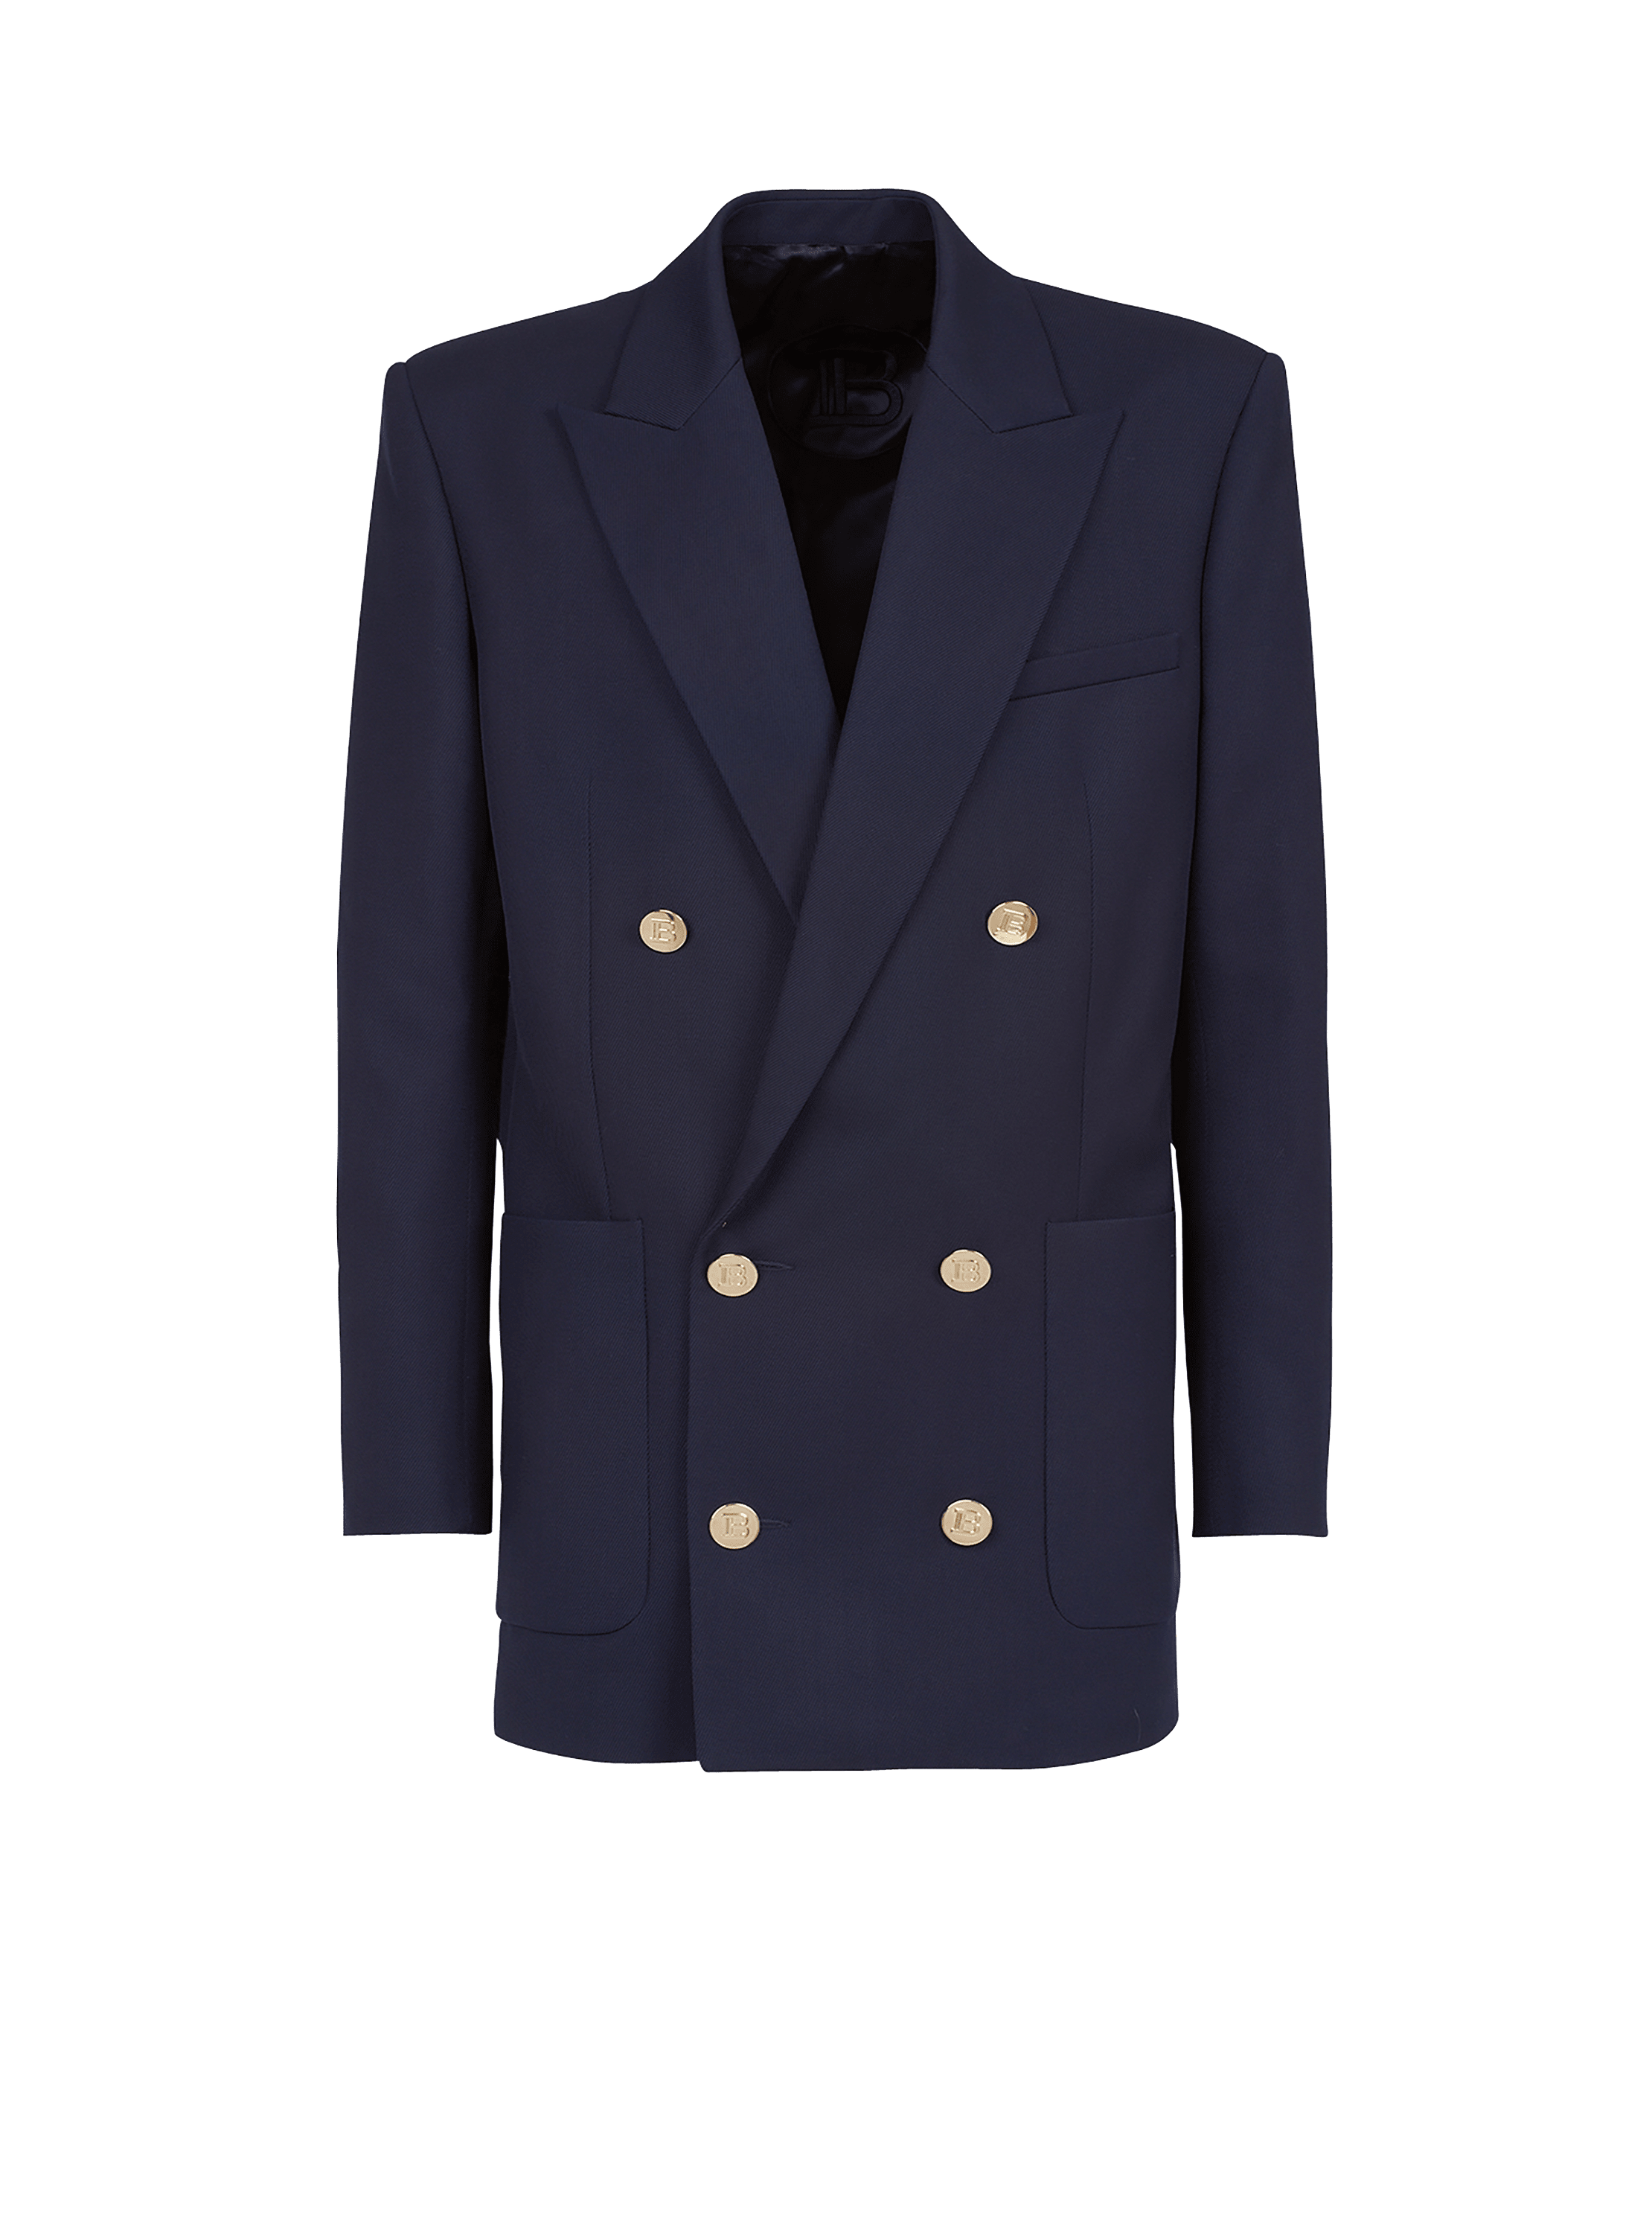 Double-breasted buttoned blazer, navy, hi-res